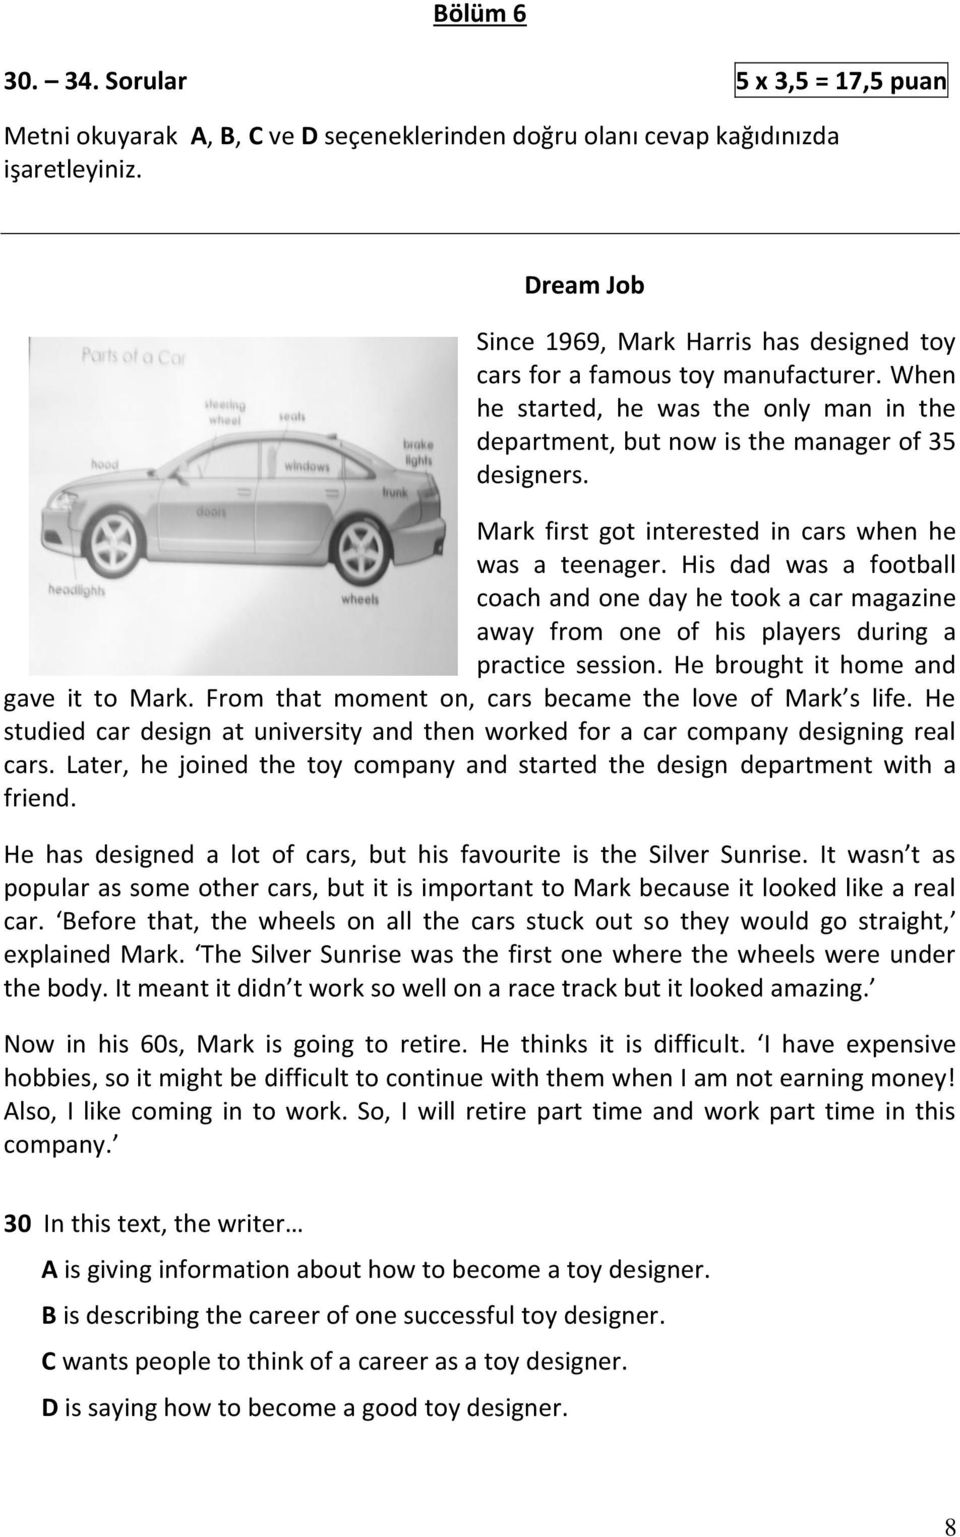 Mark first got interested in cars when he was a teenager. His dad was a football coach and one day he took a car magazine away from one of his players during a practice session.